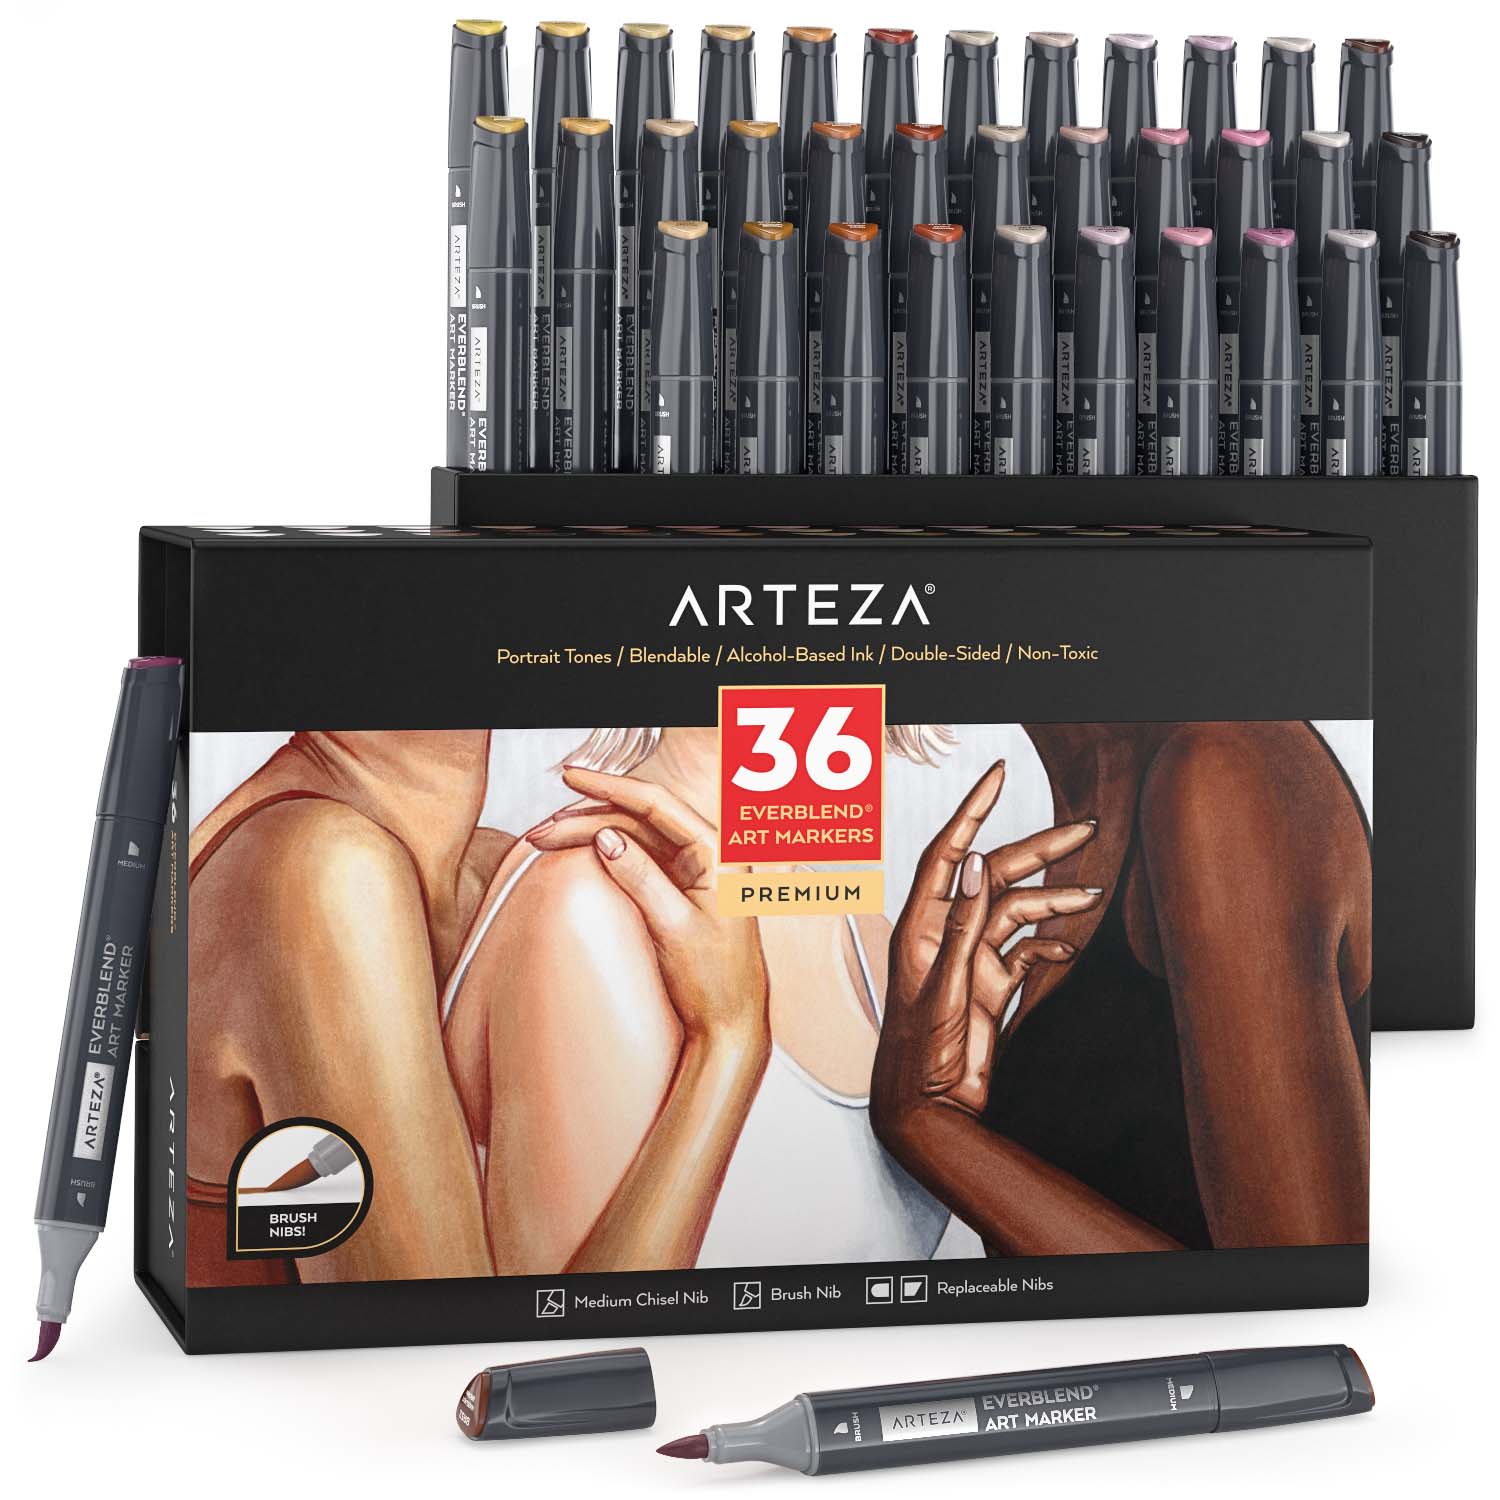 EverBlend Art Markers, Skin Tones, Single Color Tan Rose A609 by Arteza